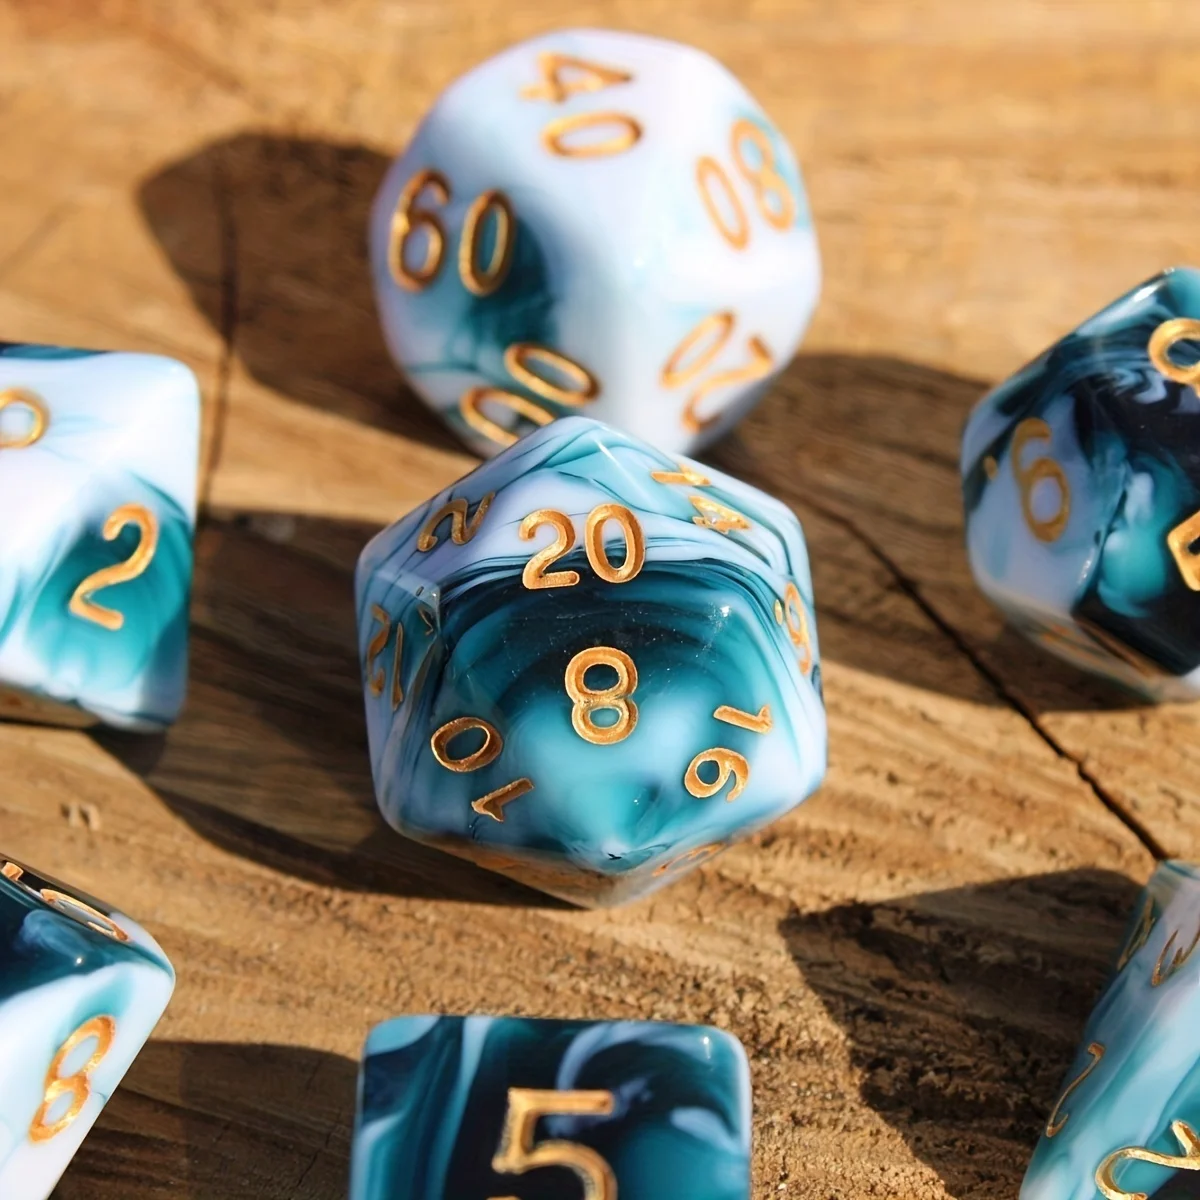 7Pcs/Set Blueberry Marble Dice for DND Dungeons and Dragons Table Games D&D RPG Tabletop Roleplaying minecraft dungeons неофициальное руководство по подземному миру